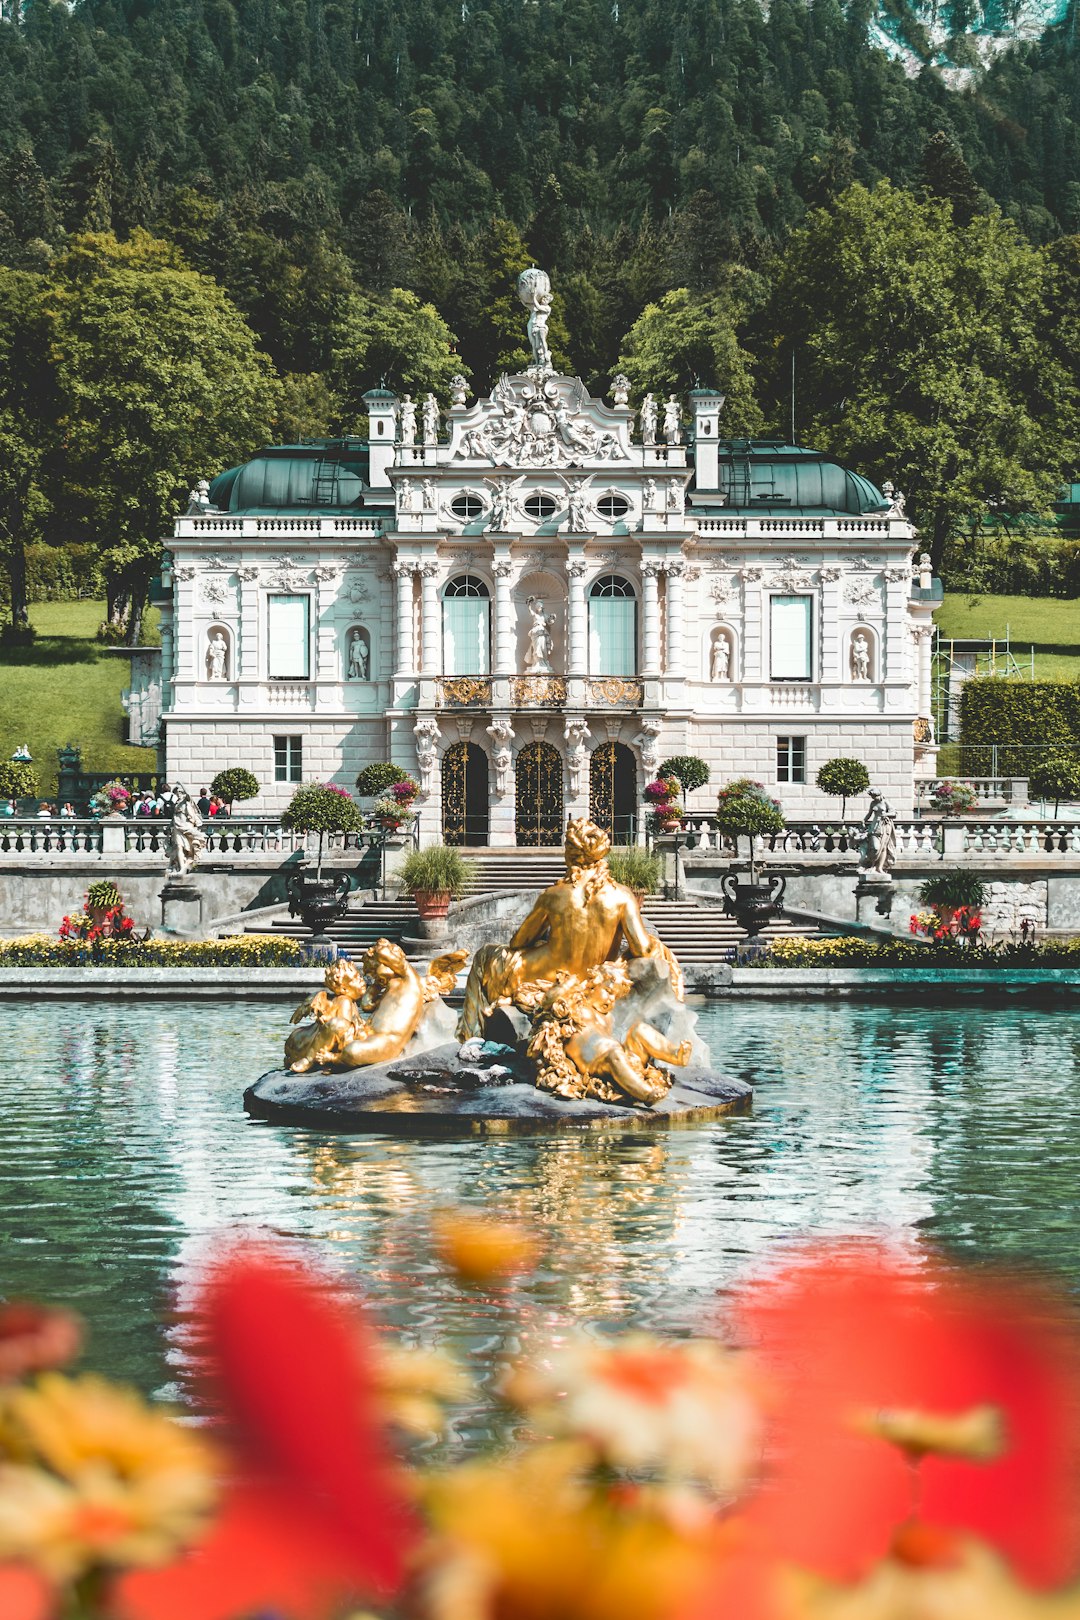 Travel Tips and Stories of Linderhof Palace in Germany